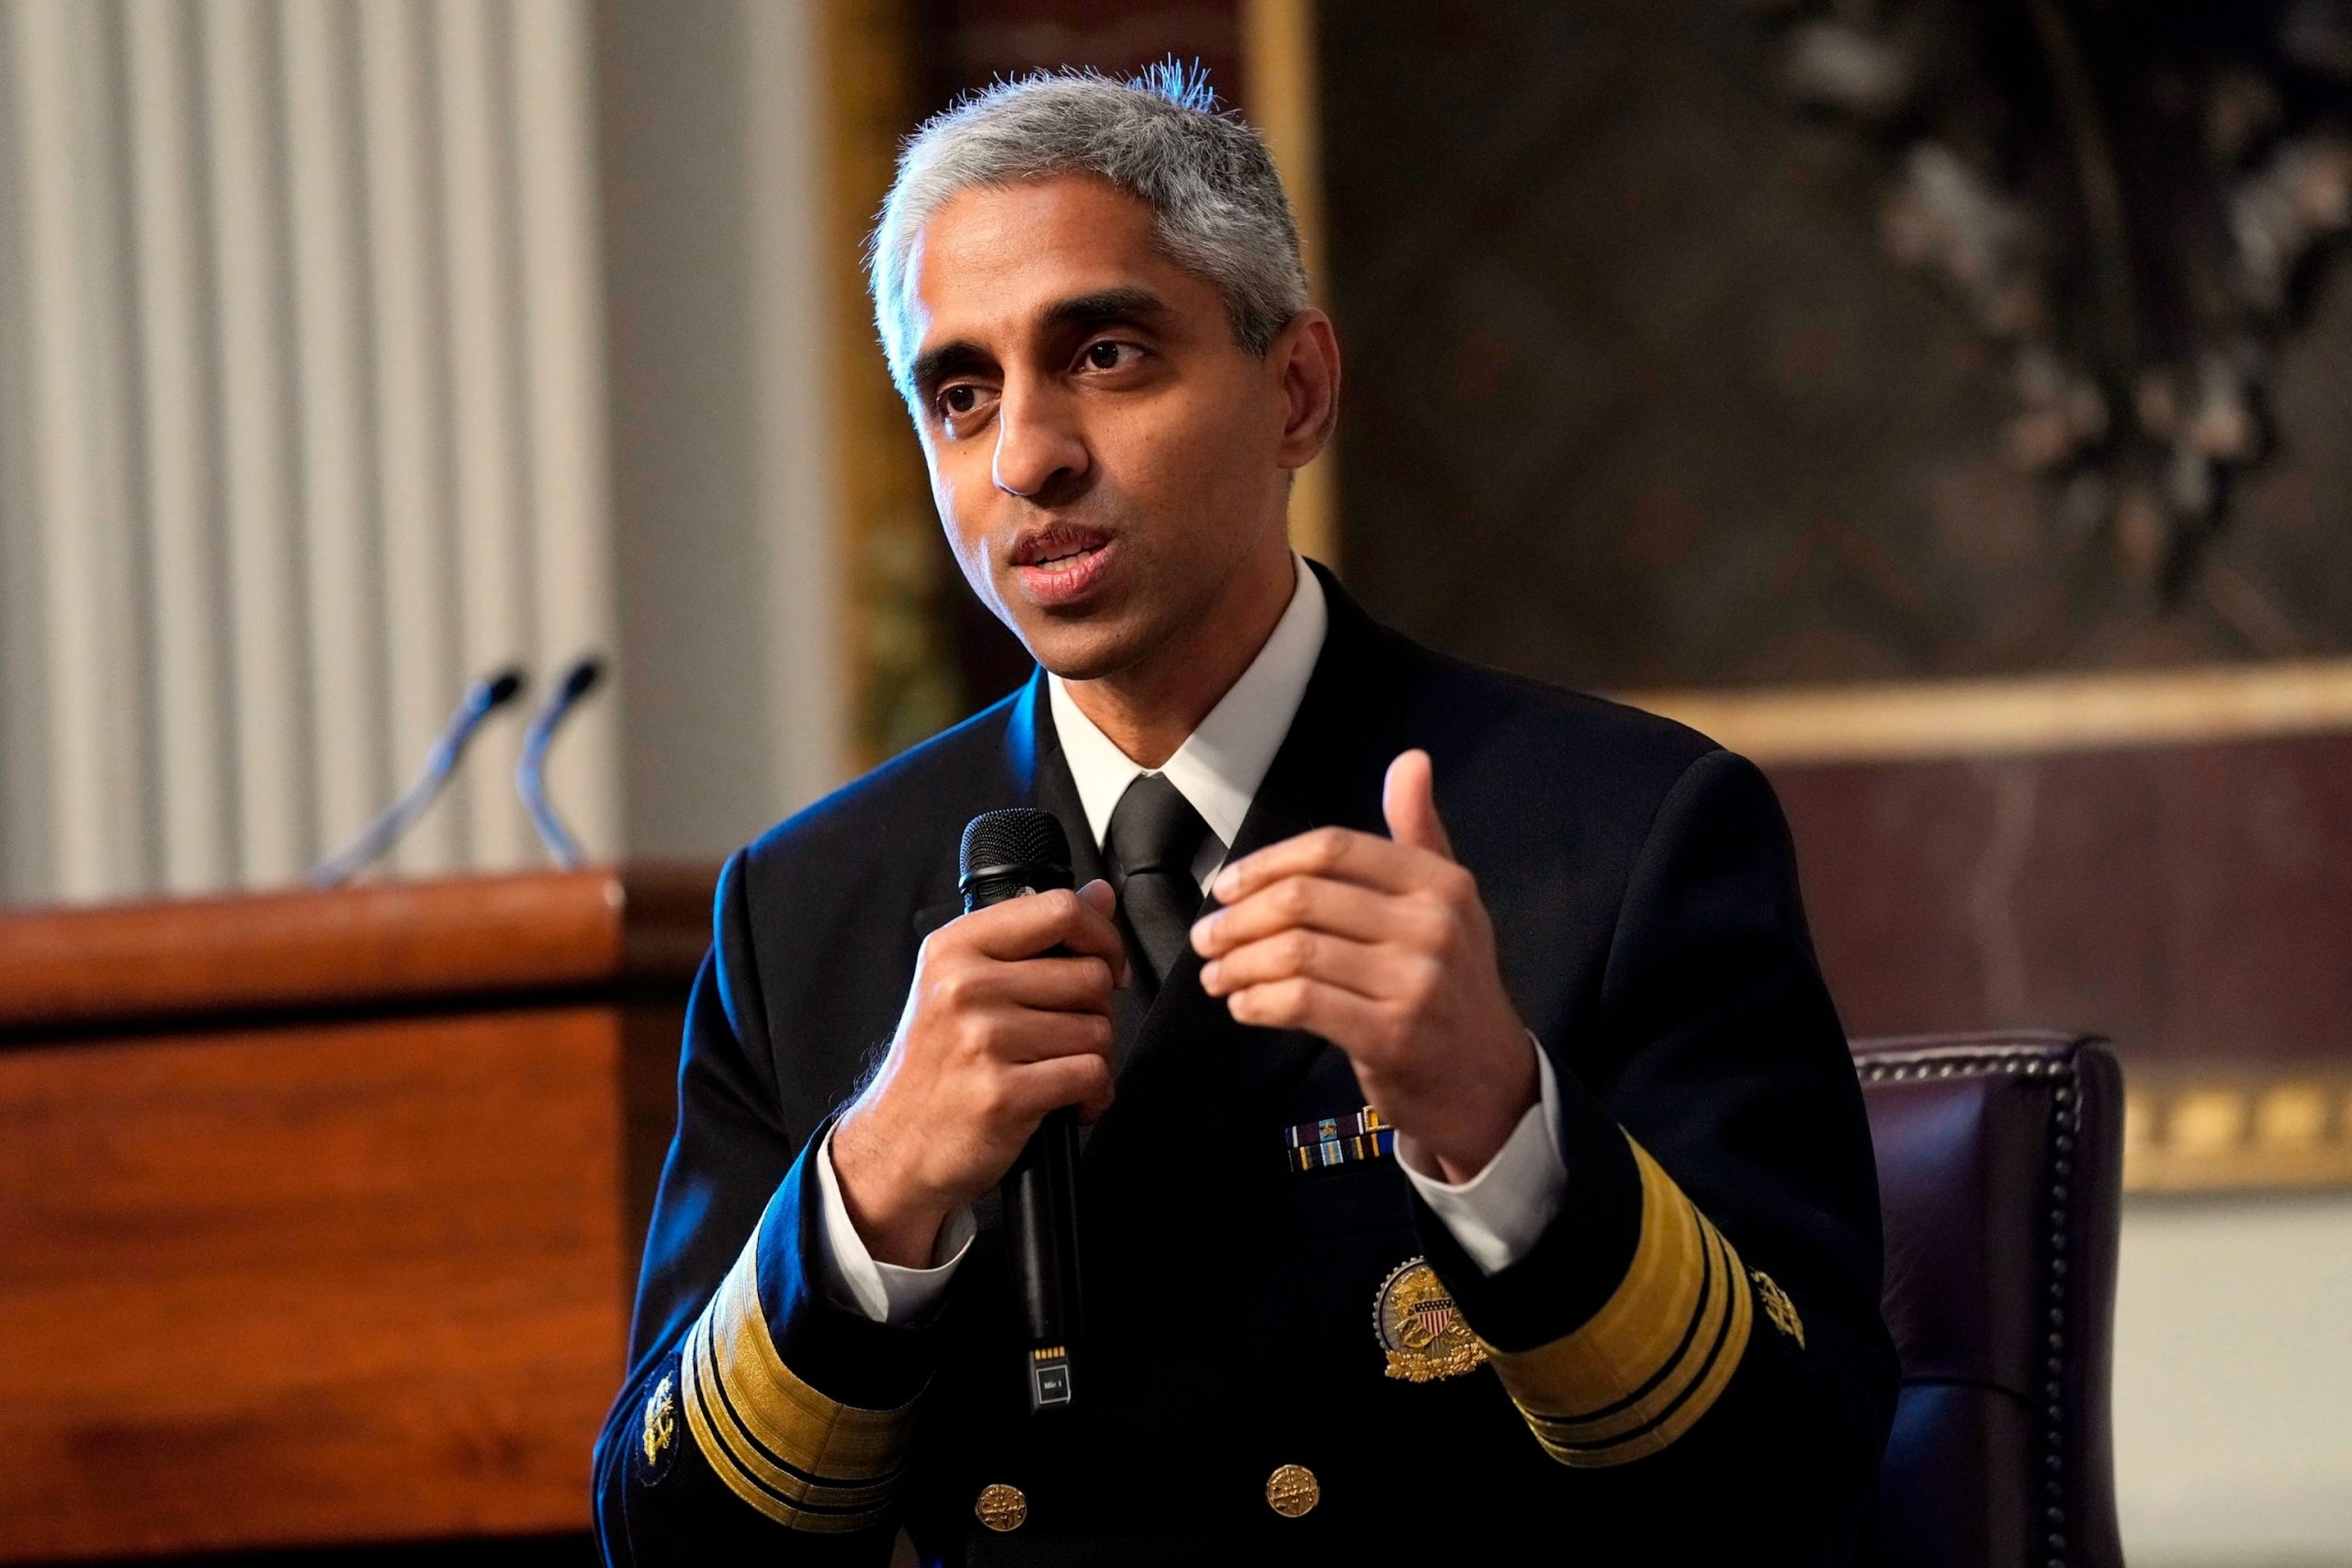 The Surgeon General Identifies Social Media and Youth Mental Health as a Defining Challenge of Our Time